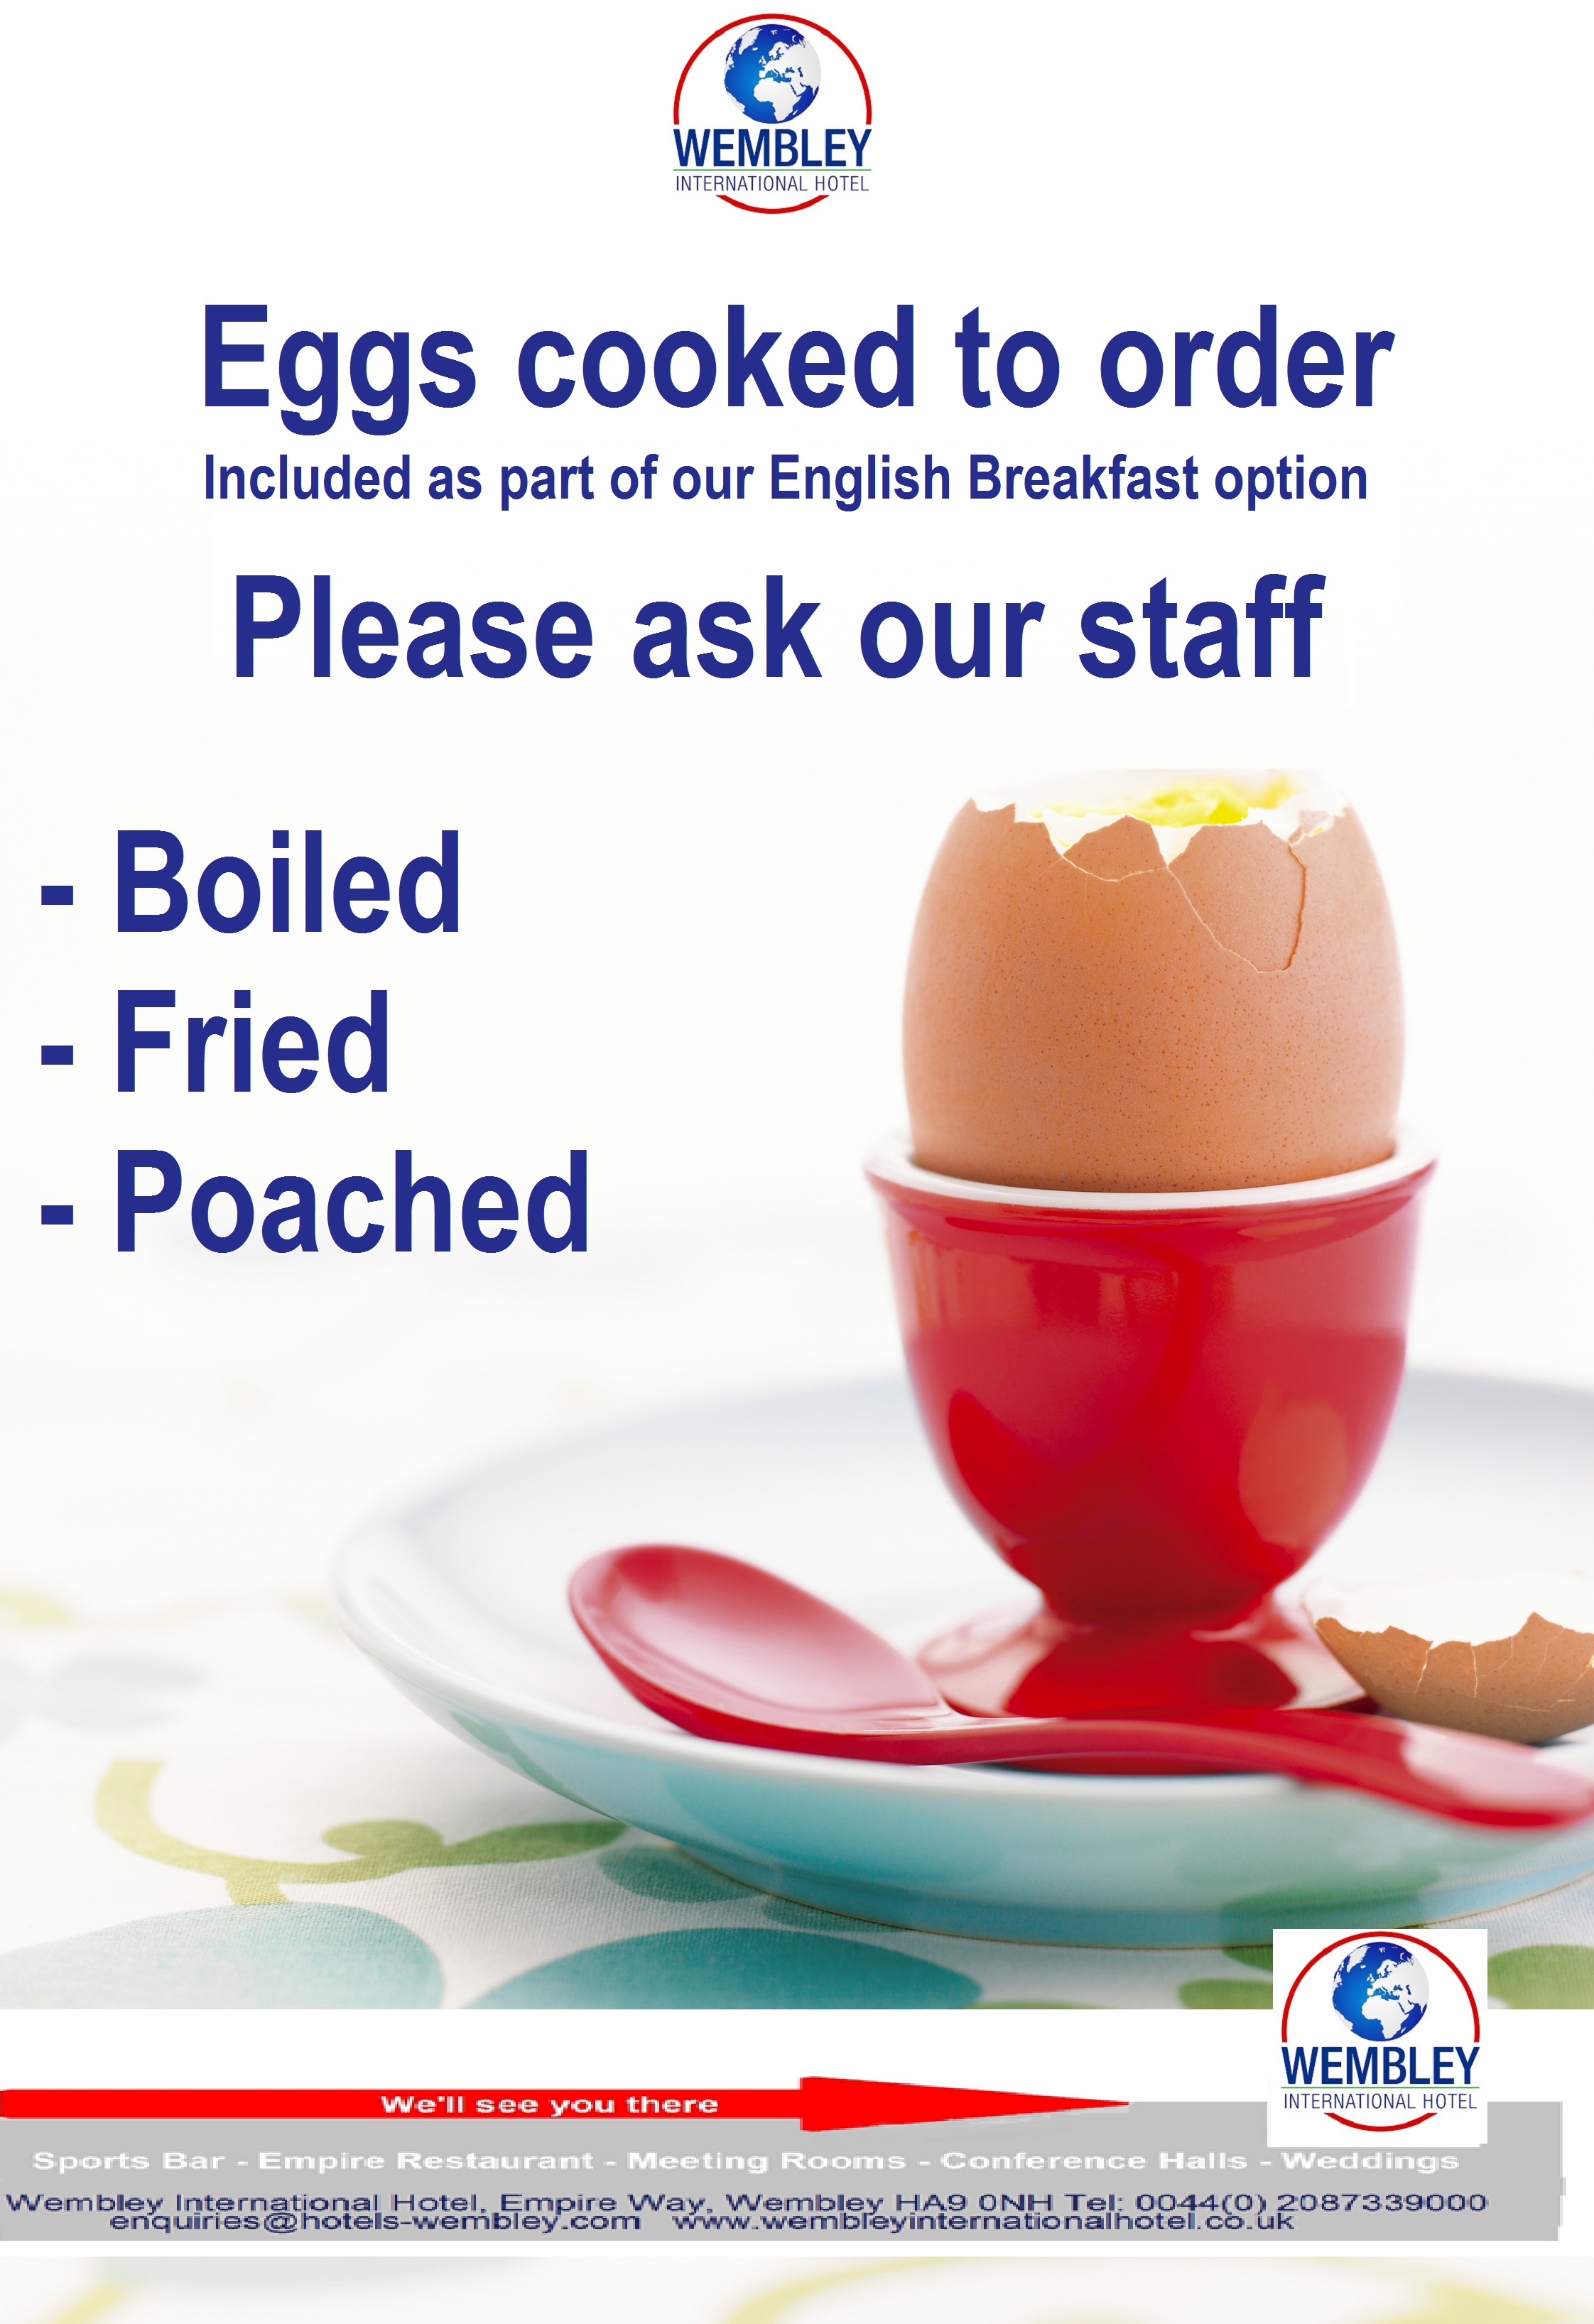 Eggs cooked to order - fried, poached or boiled - as part of our English breakfast option